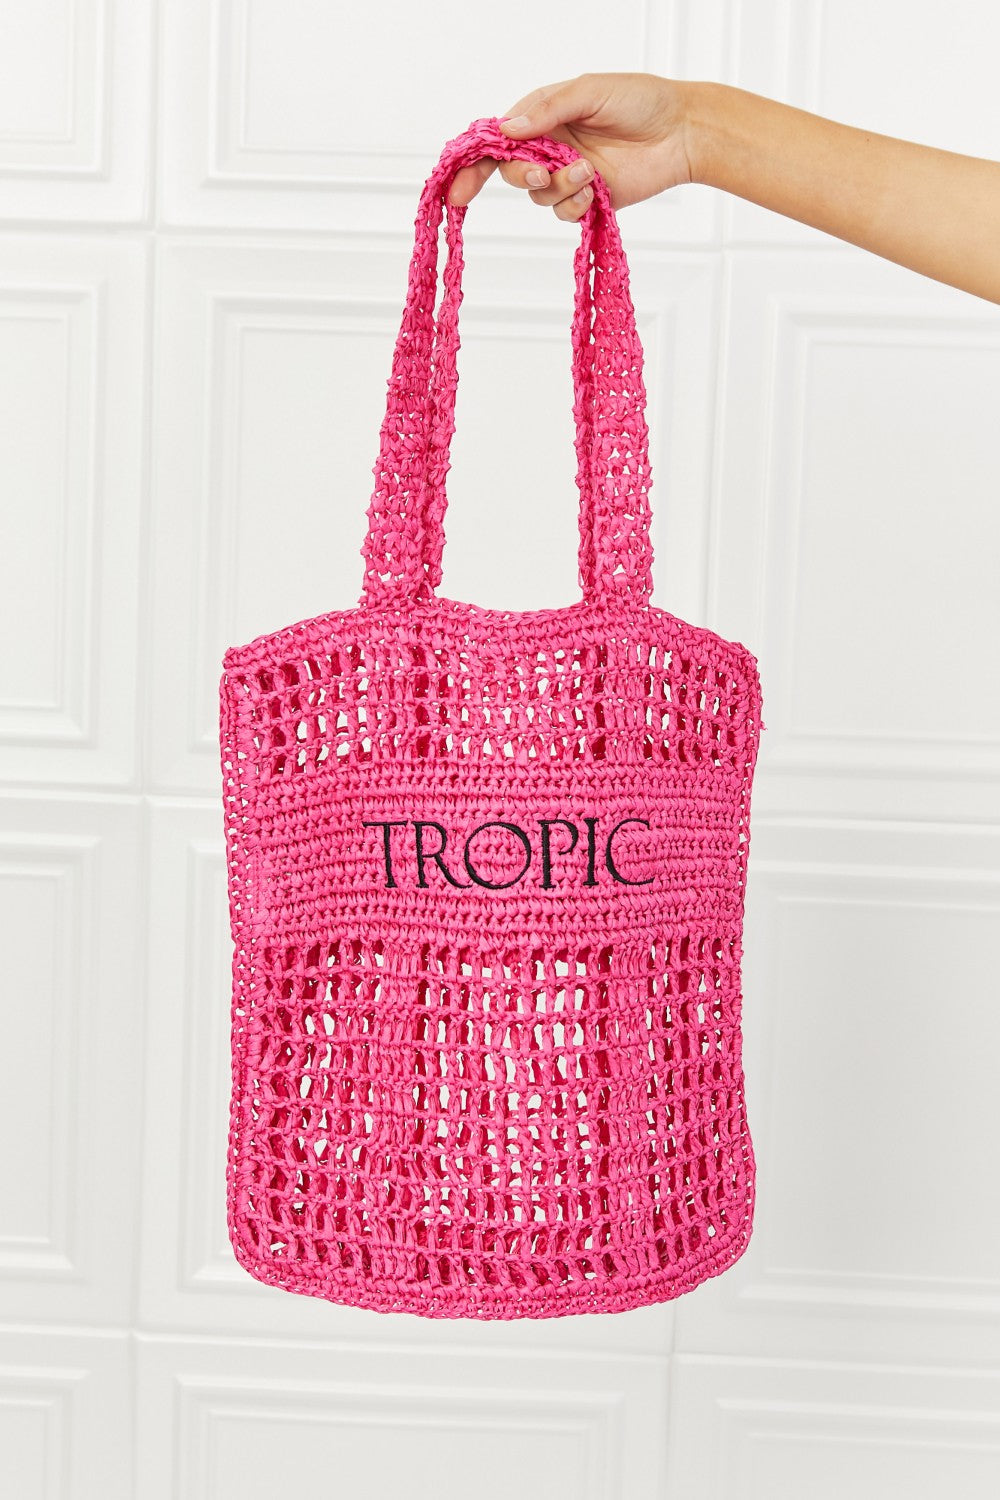 HOT PINK ONE SIZE - Fame Tropic Babe Straw Tote Bag - Ships from The US - handbags at TFC&H Co.